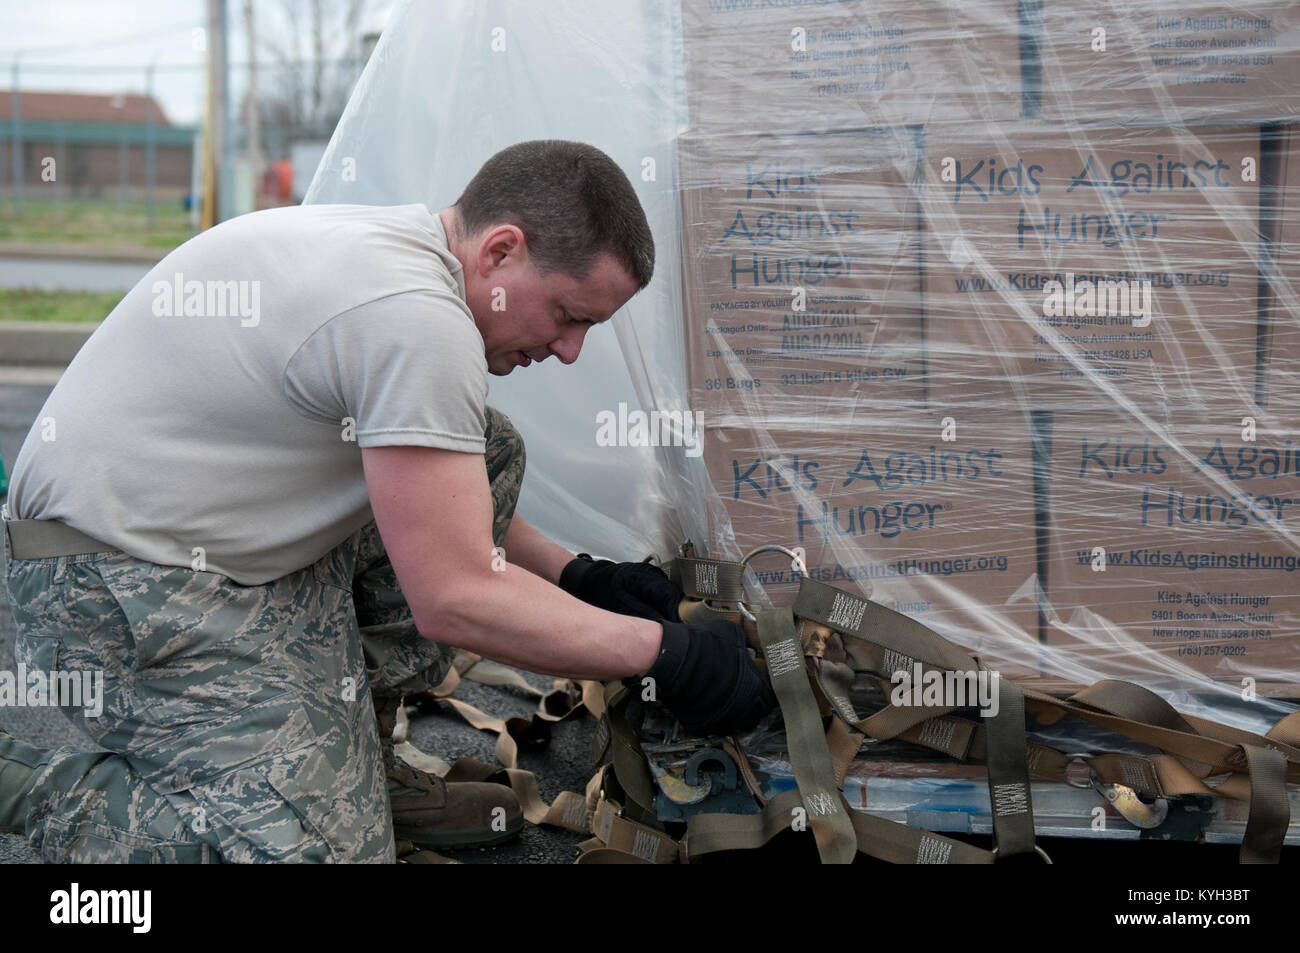 Staff Sgt. Raymond Graves III, an air cargo specialist with the 123rd Logistics Readiness Squadron, secures cargo netting on a pallet of humanitarian goods bound for Haiti on March 13, 2012. The Kentucky Air National Guard is helping Children’s Lifeline, a Kentucky-based non-profit organization, ship food and other supplies to Haiti through the Denton Program. The Denton Program is a U.S. government effort that allows private citizens and organizations to use space available on U.S. military cargo planes to transport humanitarian goods. (U.S. Air Force photo by Master Sgt. Phil Speck) Stock Photo